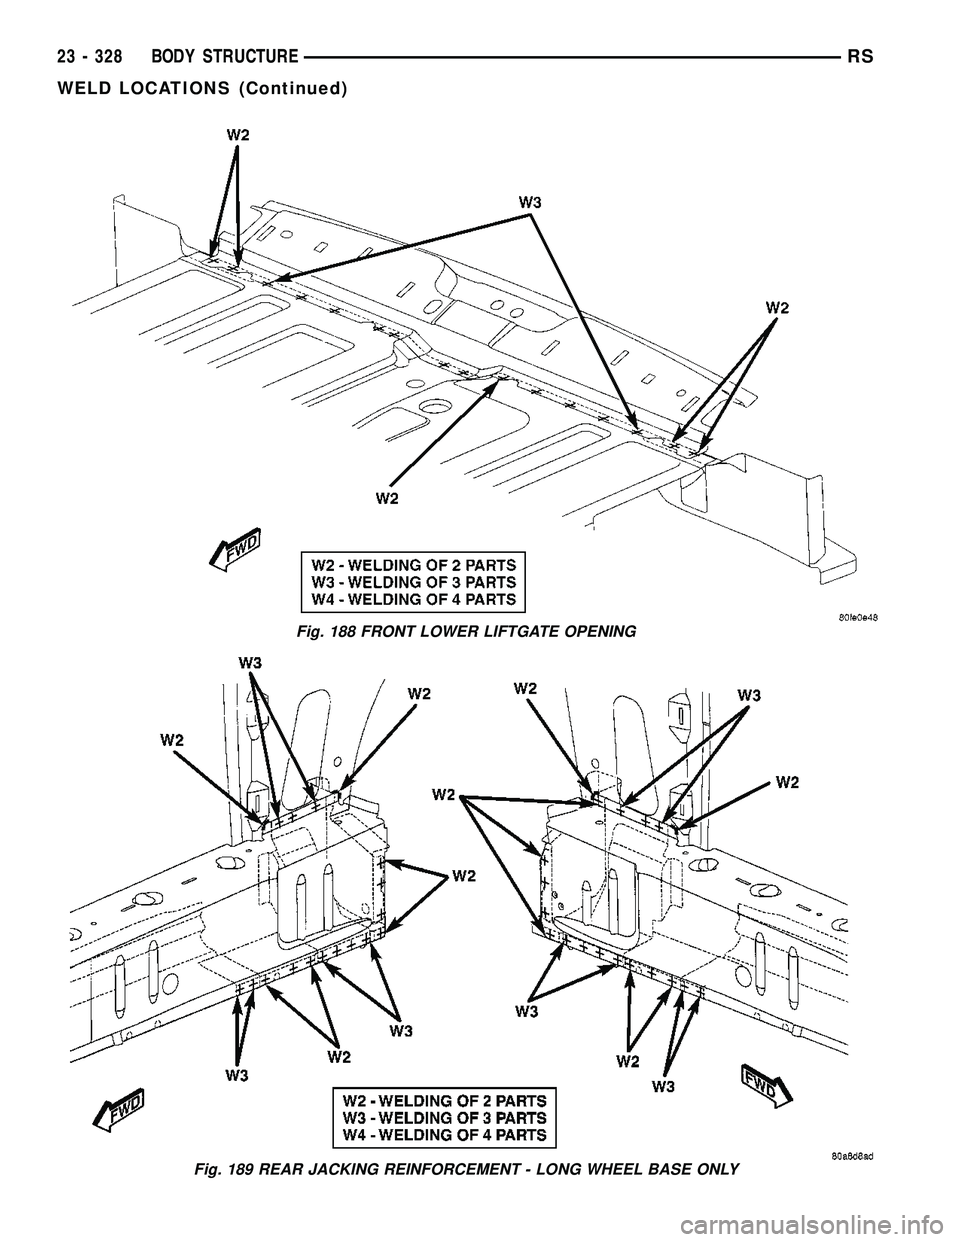 CHRYSLER VOYAGER 2005  Service Manual Fig. 188 FRONT LOWER LIFTGATE OPENING
Fig. 189 REAR JACKING REINFORCEMENT - LONG WHEEL BASE ONLY
23 - 328 BODY STRUCTURERS
WELD LOCATIONS (Continued) 